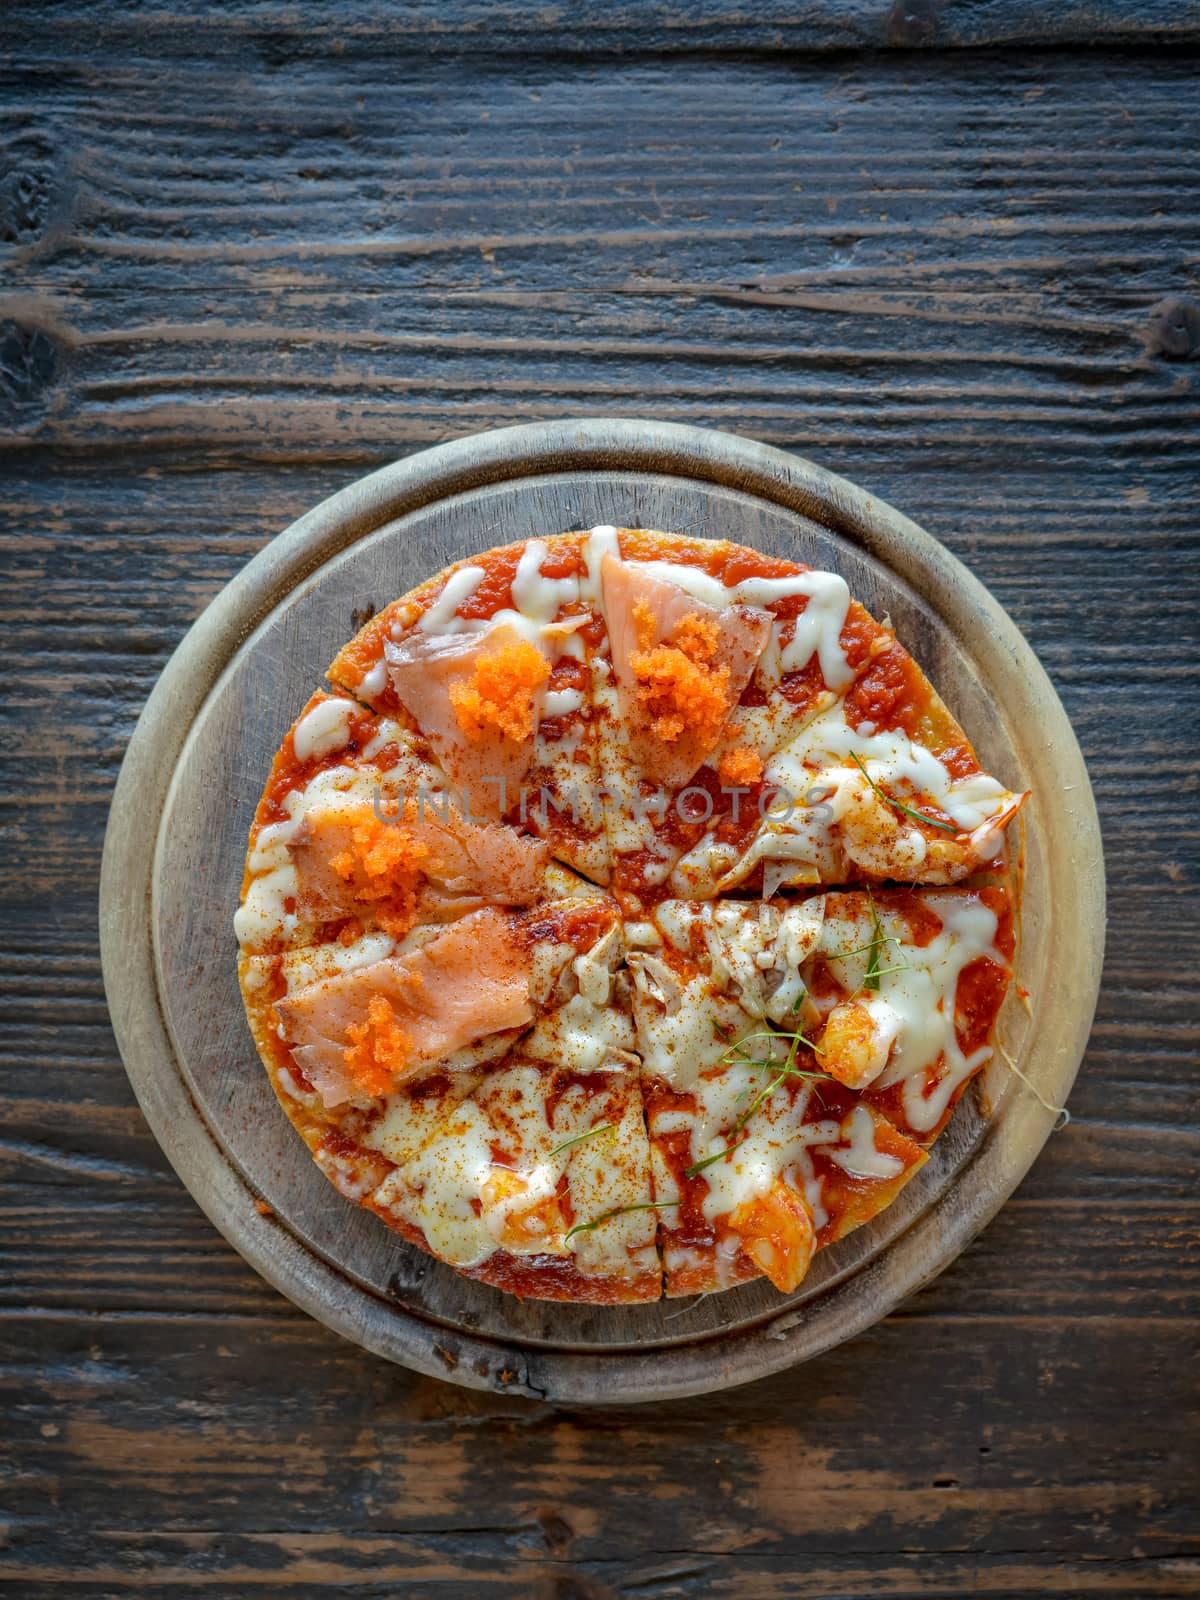 "Smoked Salmon with Sprinkle of Shrimp Roe" Baby Crusty Pizza.